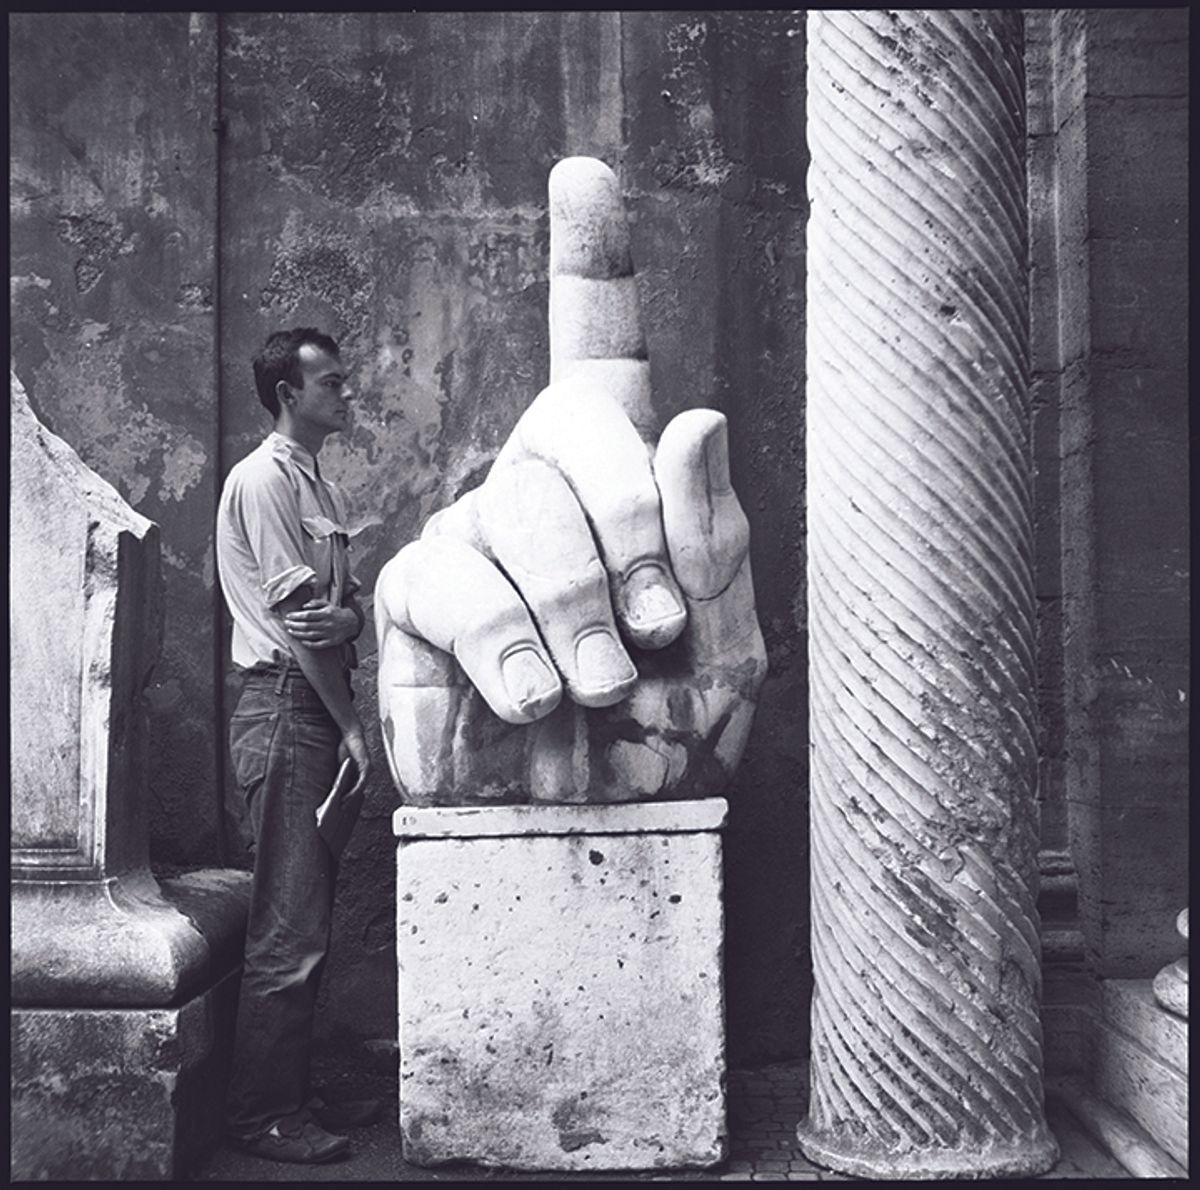 A photograph of Cy Twombly with ancient relics, taken in 1952 © Robert Rauschenberg Foundation; Courtesy of Museum of Fine Arts, Boston